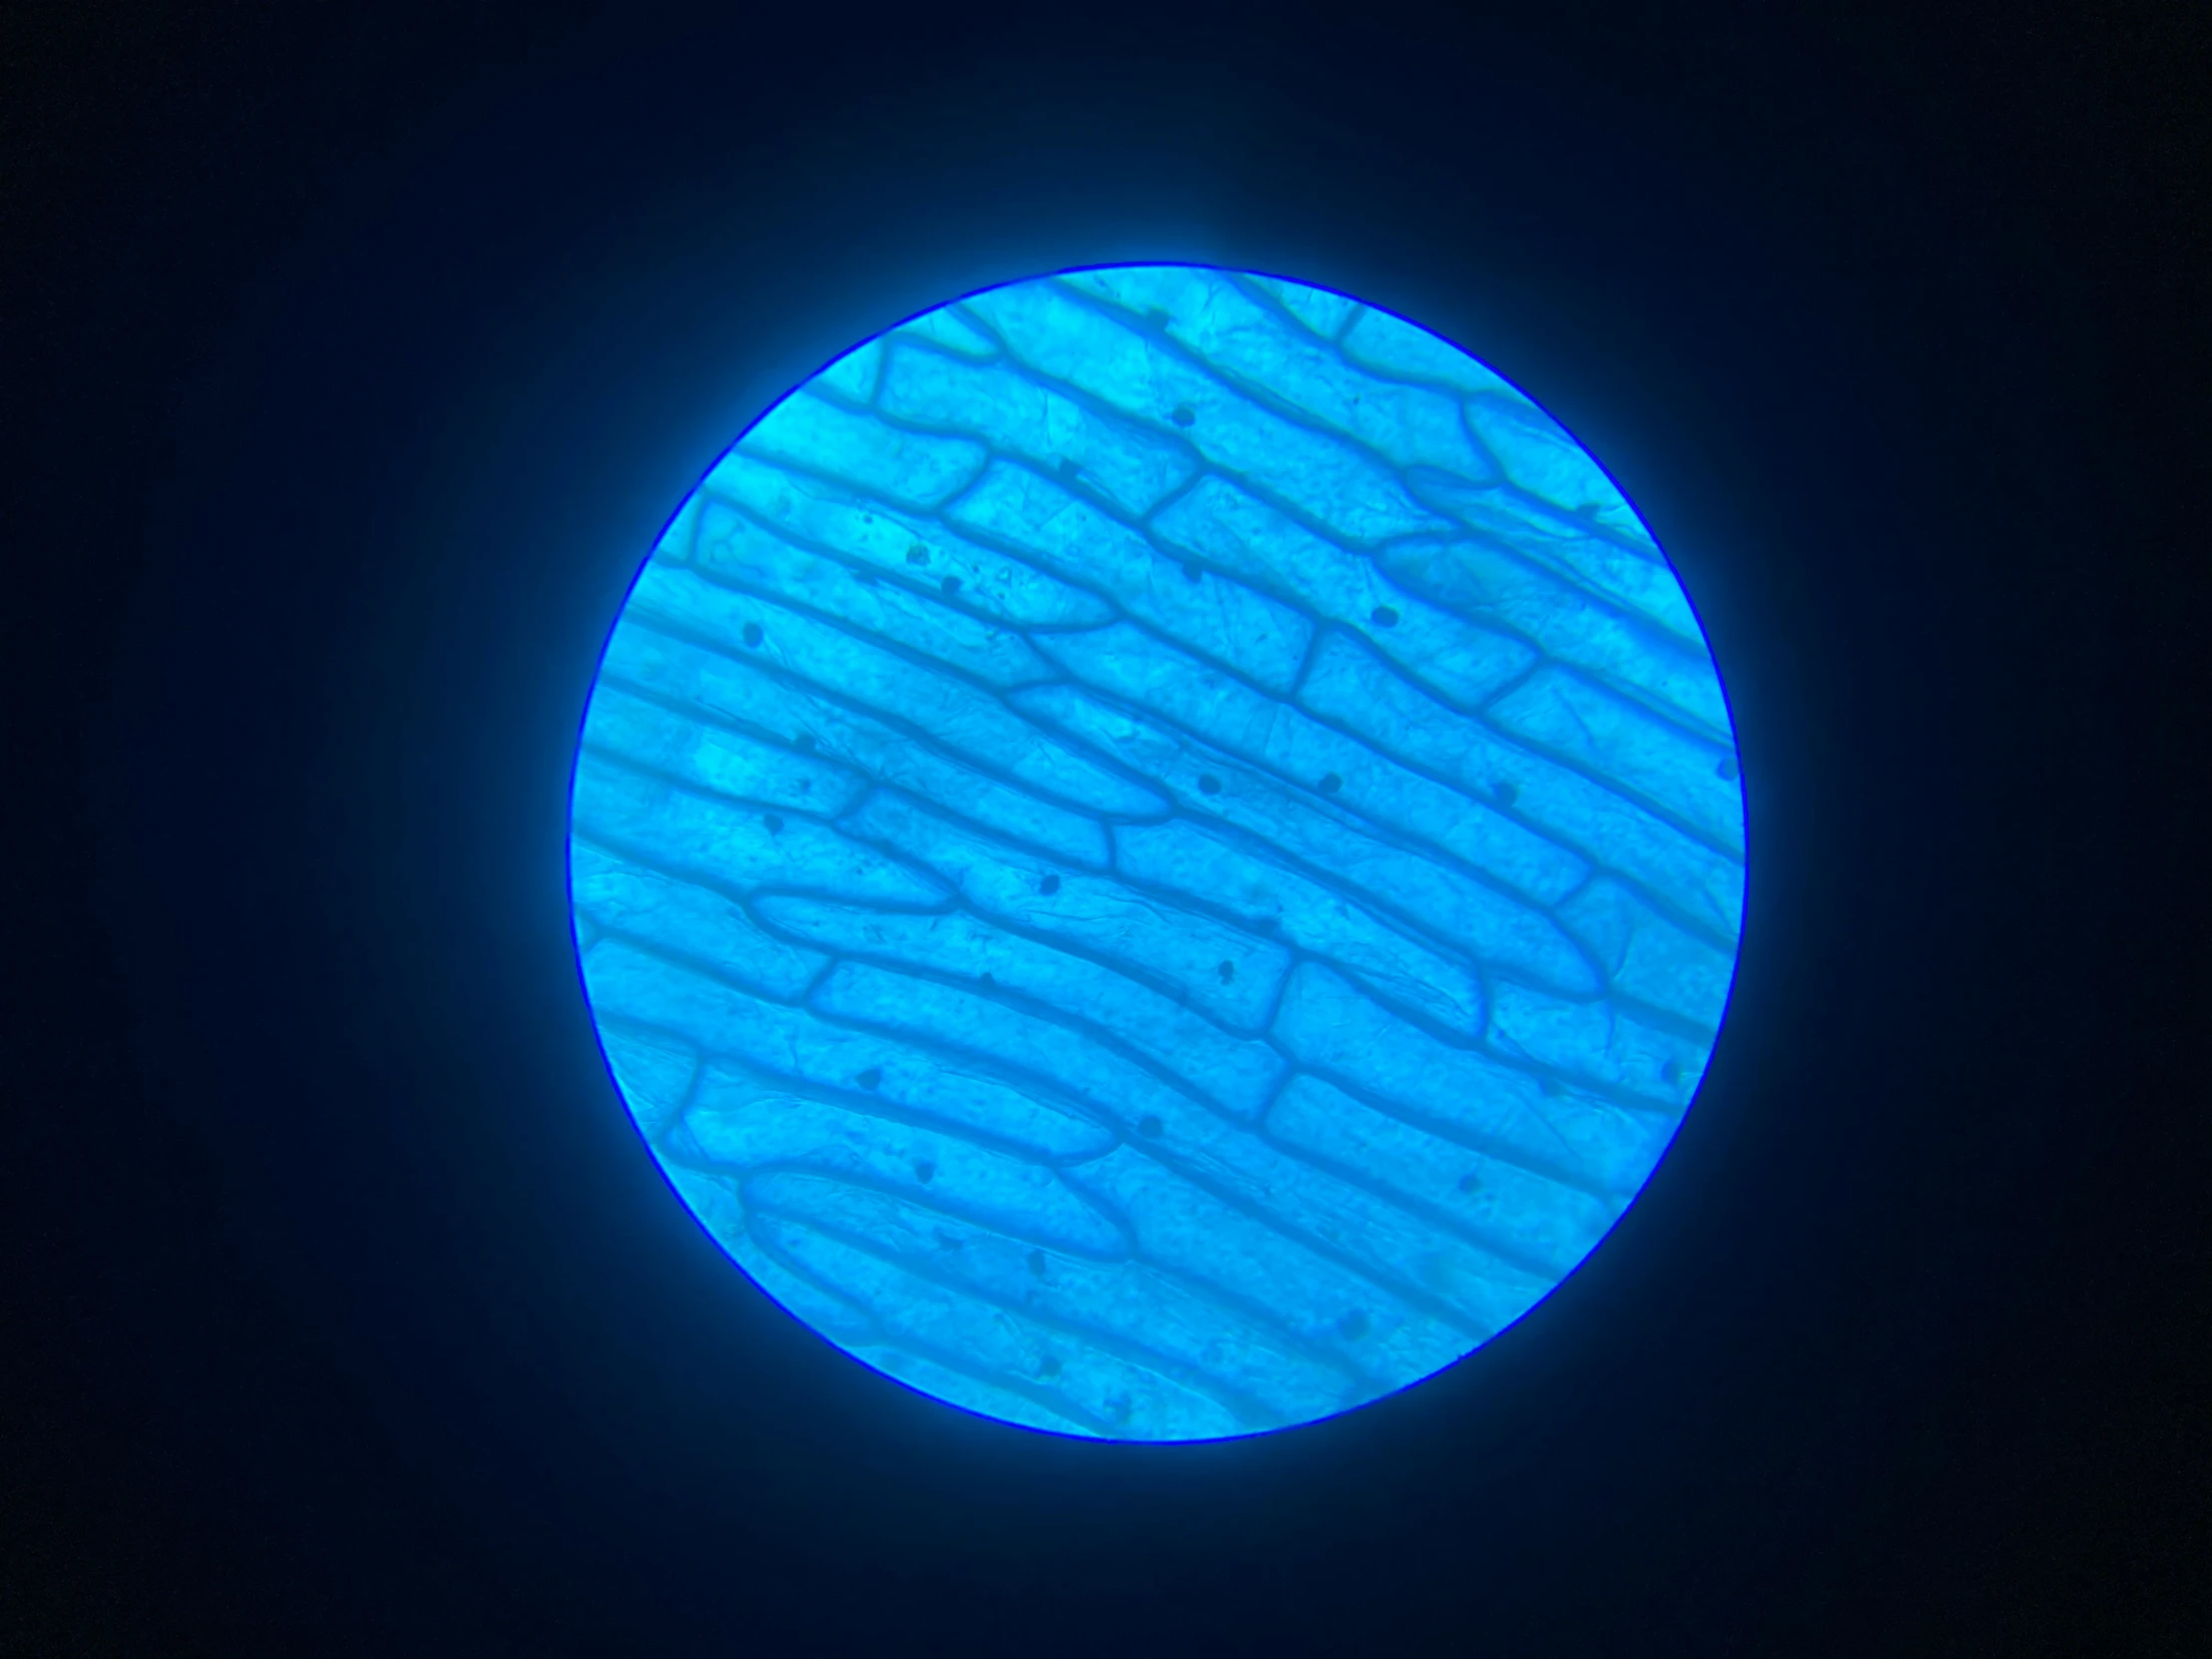 a blue round shaped object on a dark background